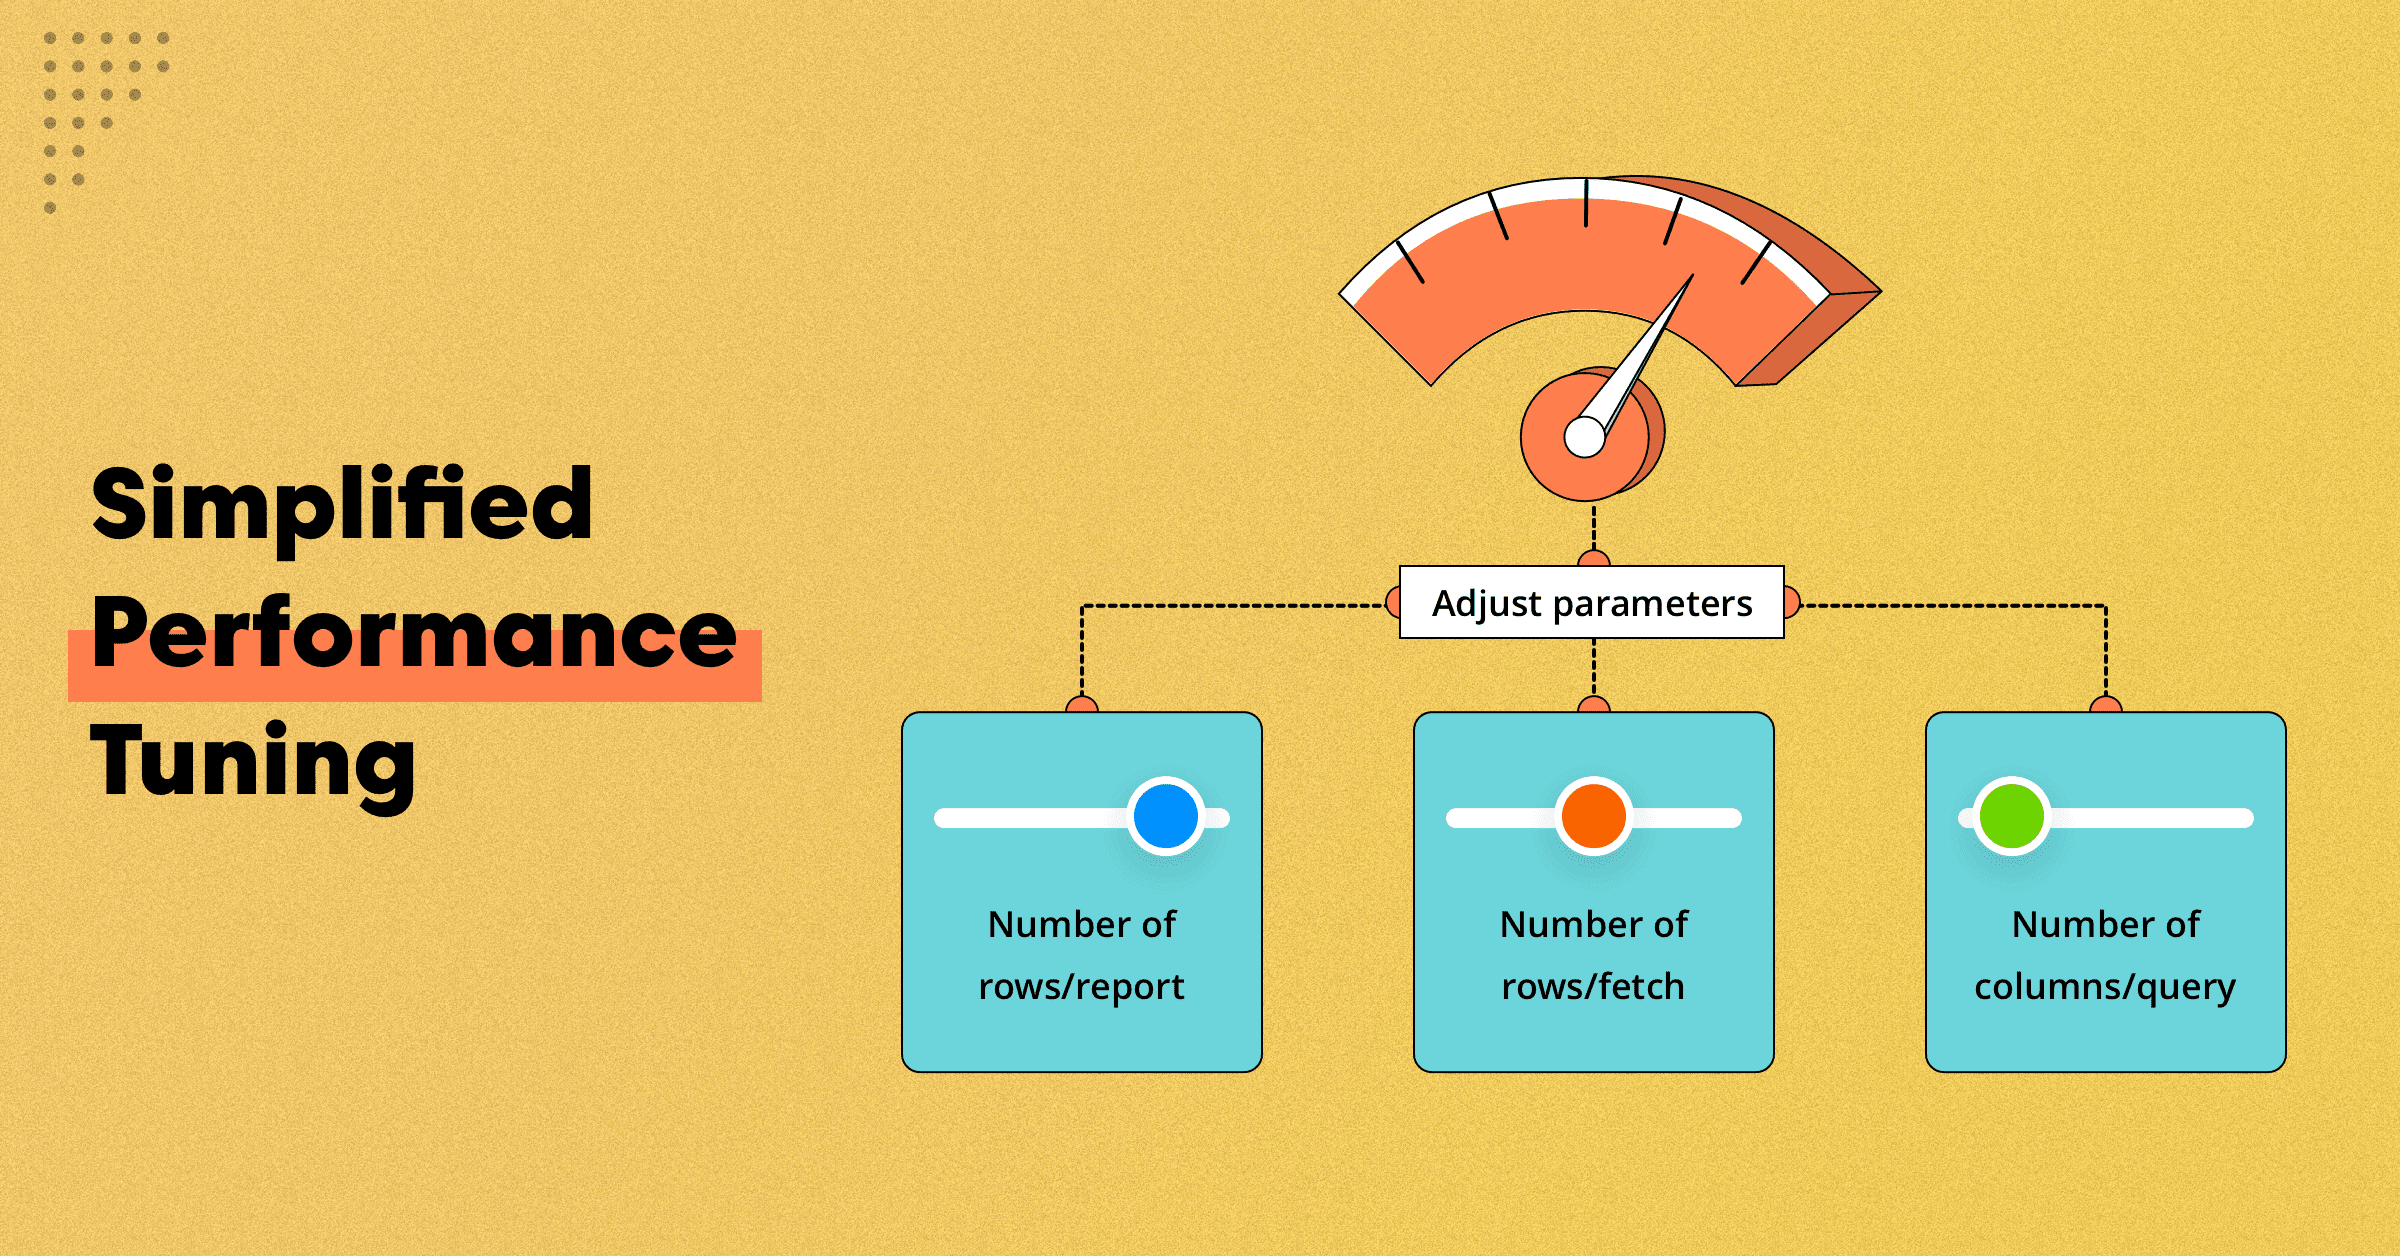 Simplified Performance Tuning